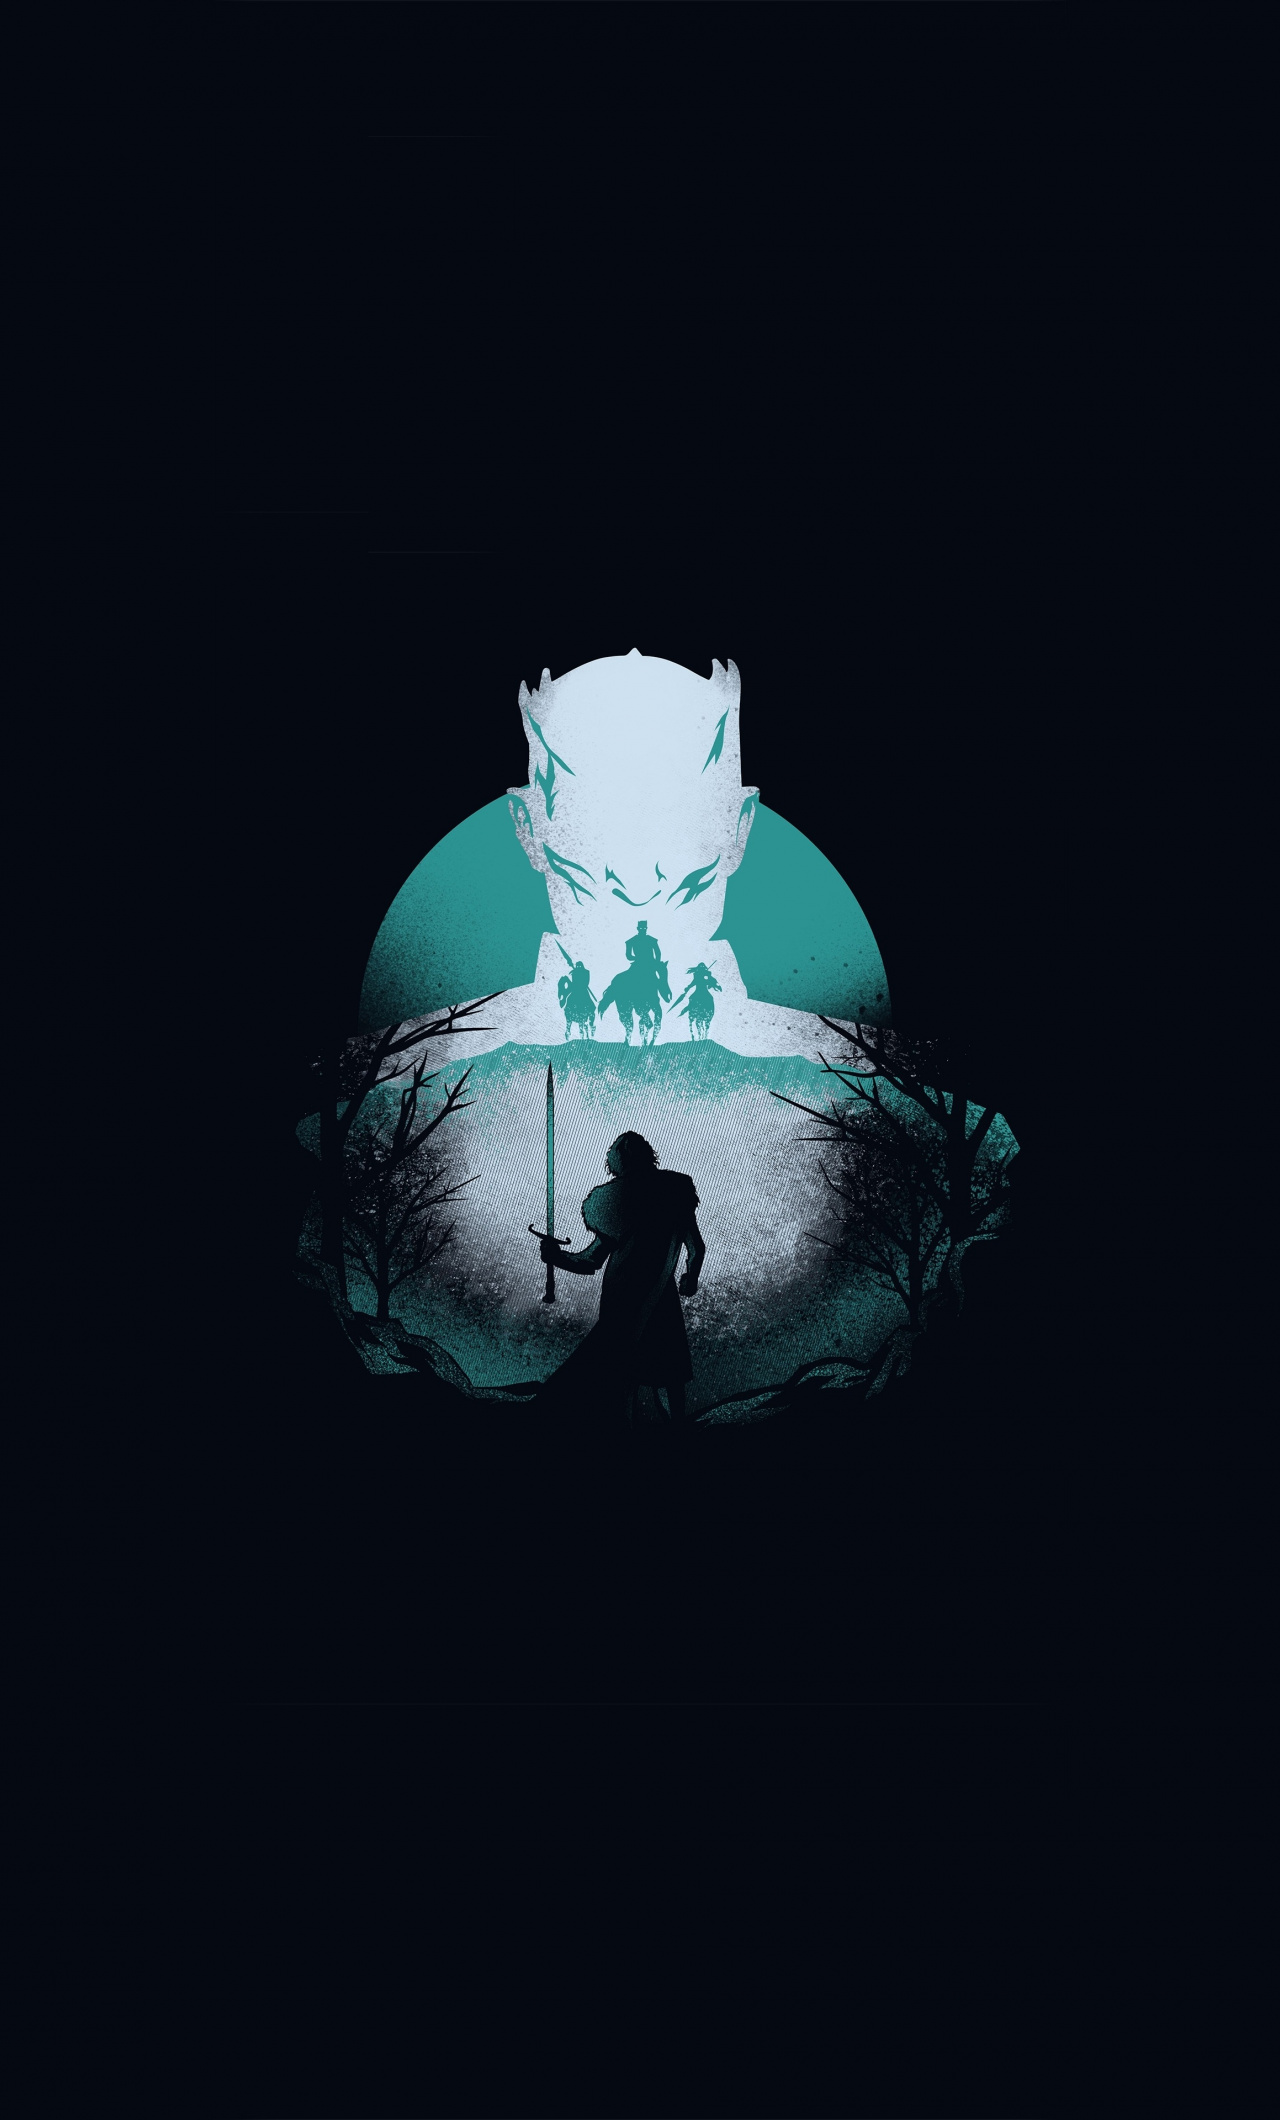 Game Of Thrones, Knight King And Jon Snow, Season 8, - Game Of Thrones 4k  Wallpaper Android - 1280x2120 Wallpaper 